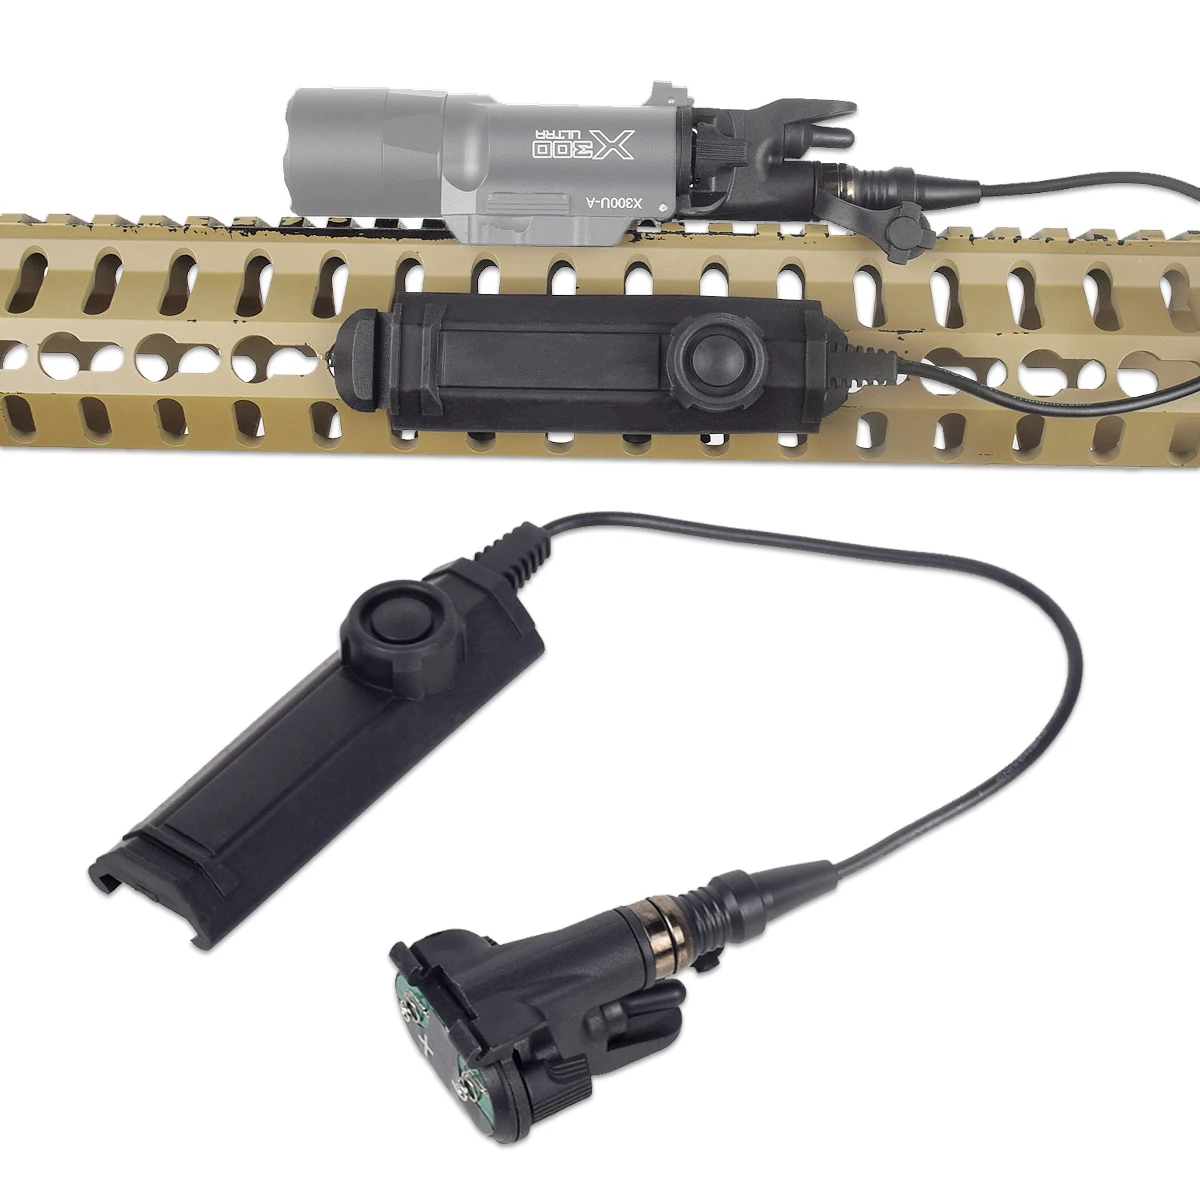 

Tactical Weapon Upgrade SF X-Series Light Remote Dual Switch For X300 X400 Constant Momentary Control Hunting Flashlight